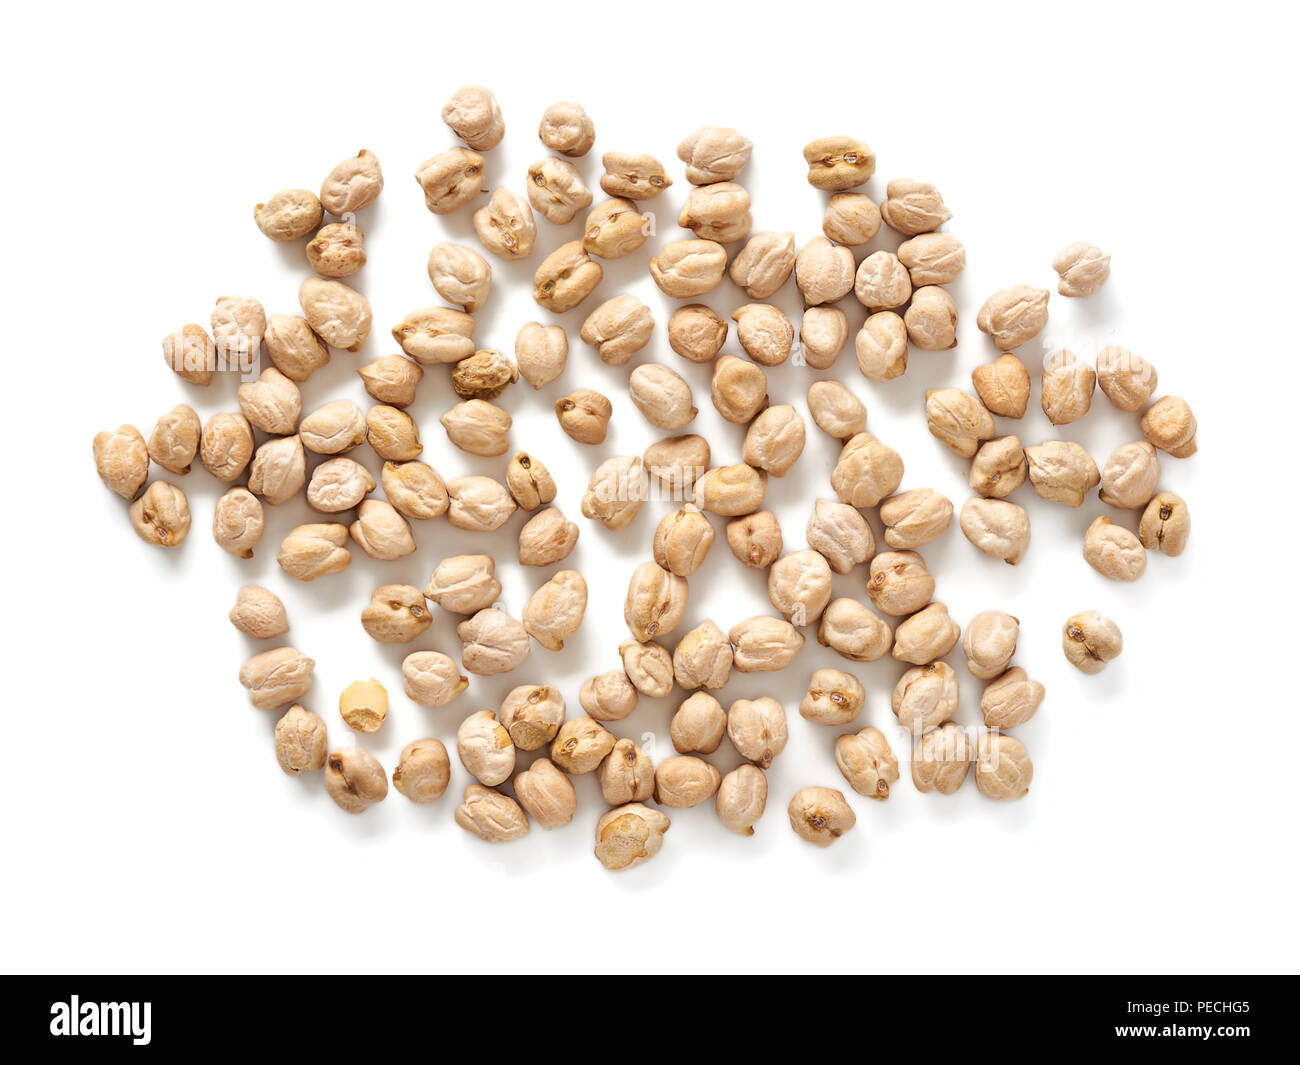 Chickpeas isolated on a white background Stock Photo